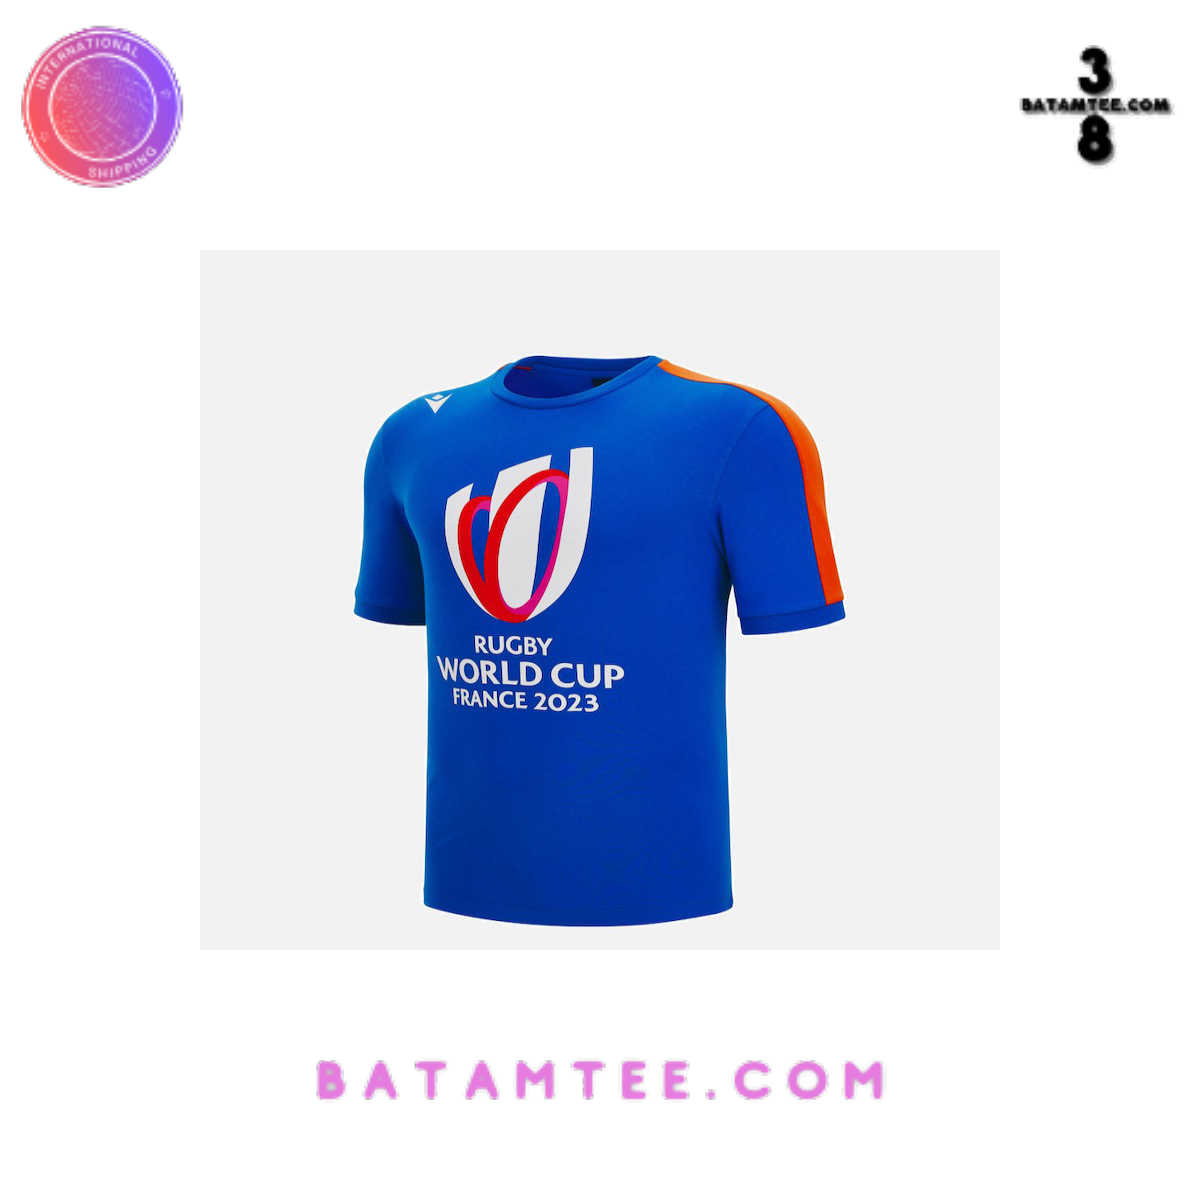 Rugby World Cup France 2023 T-Shirt Royal Blue